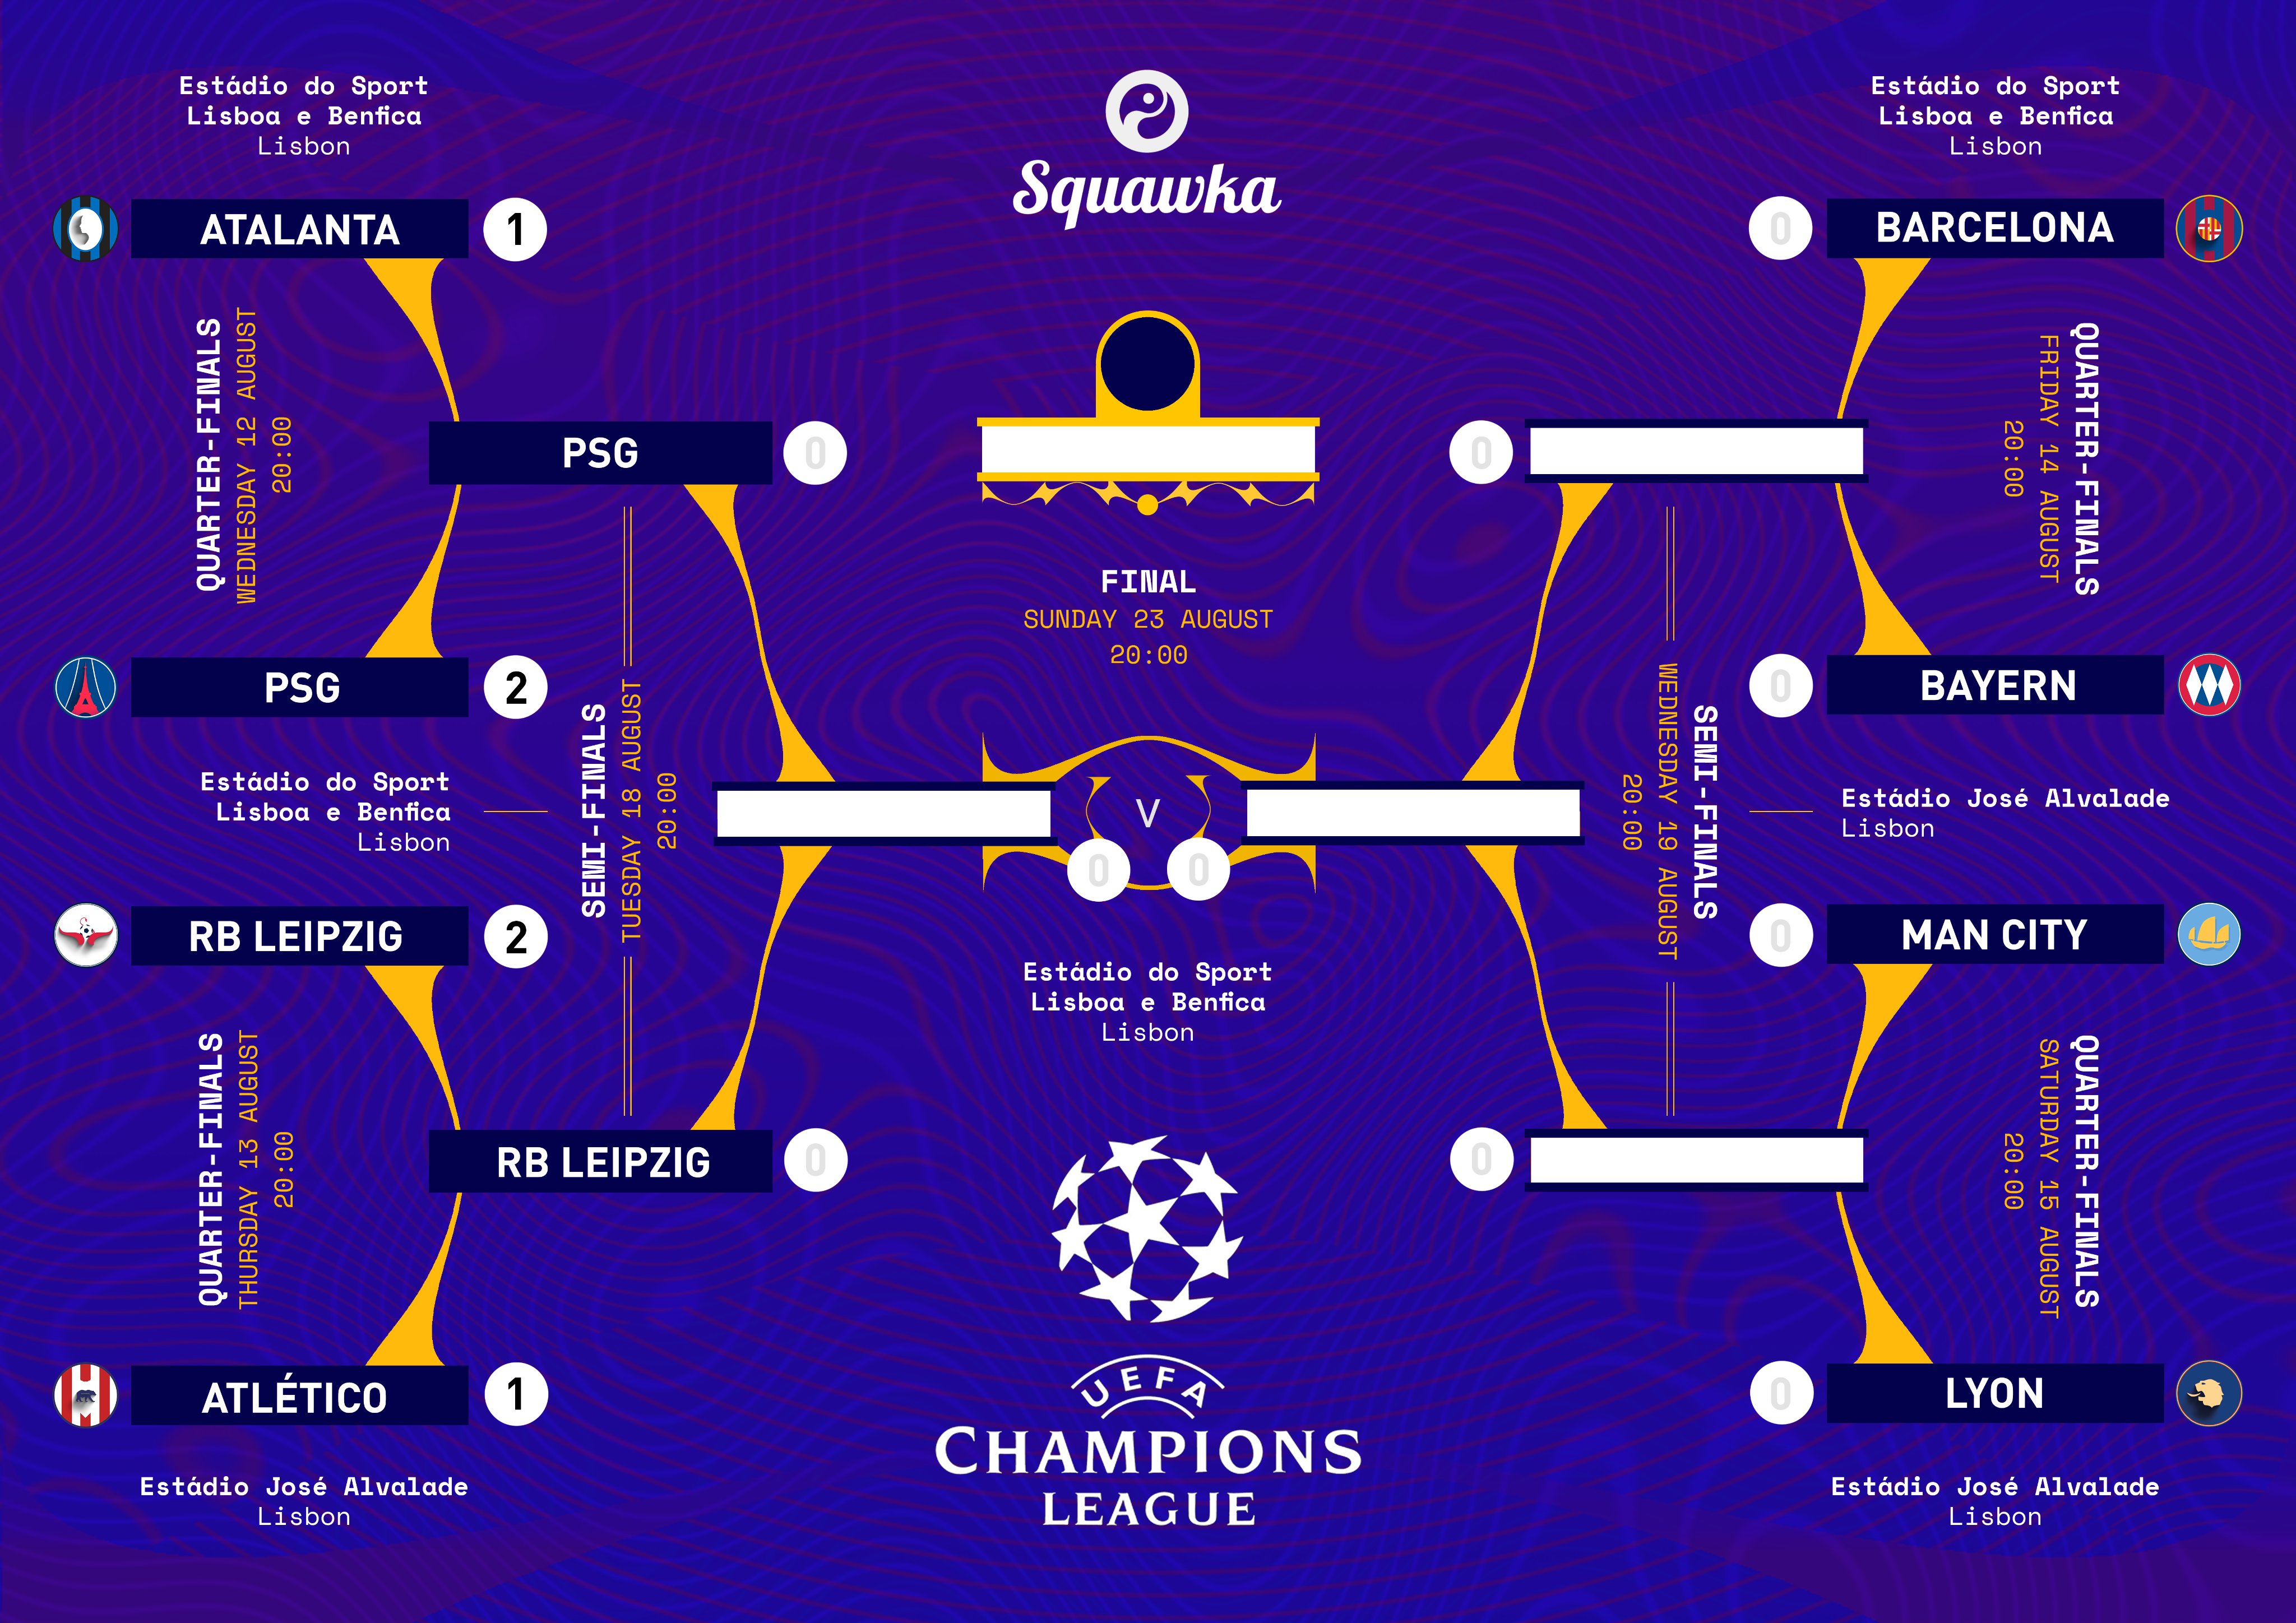 Champions League 2019-20 live streaming, full schedule and match timings